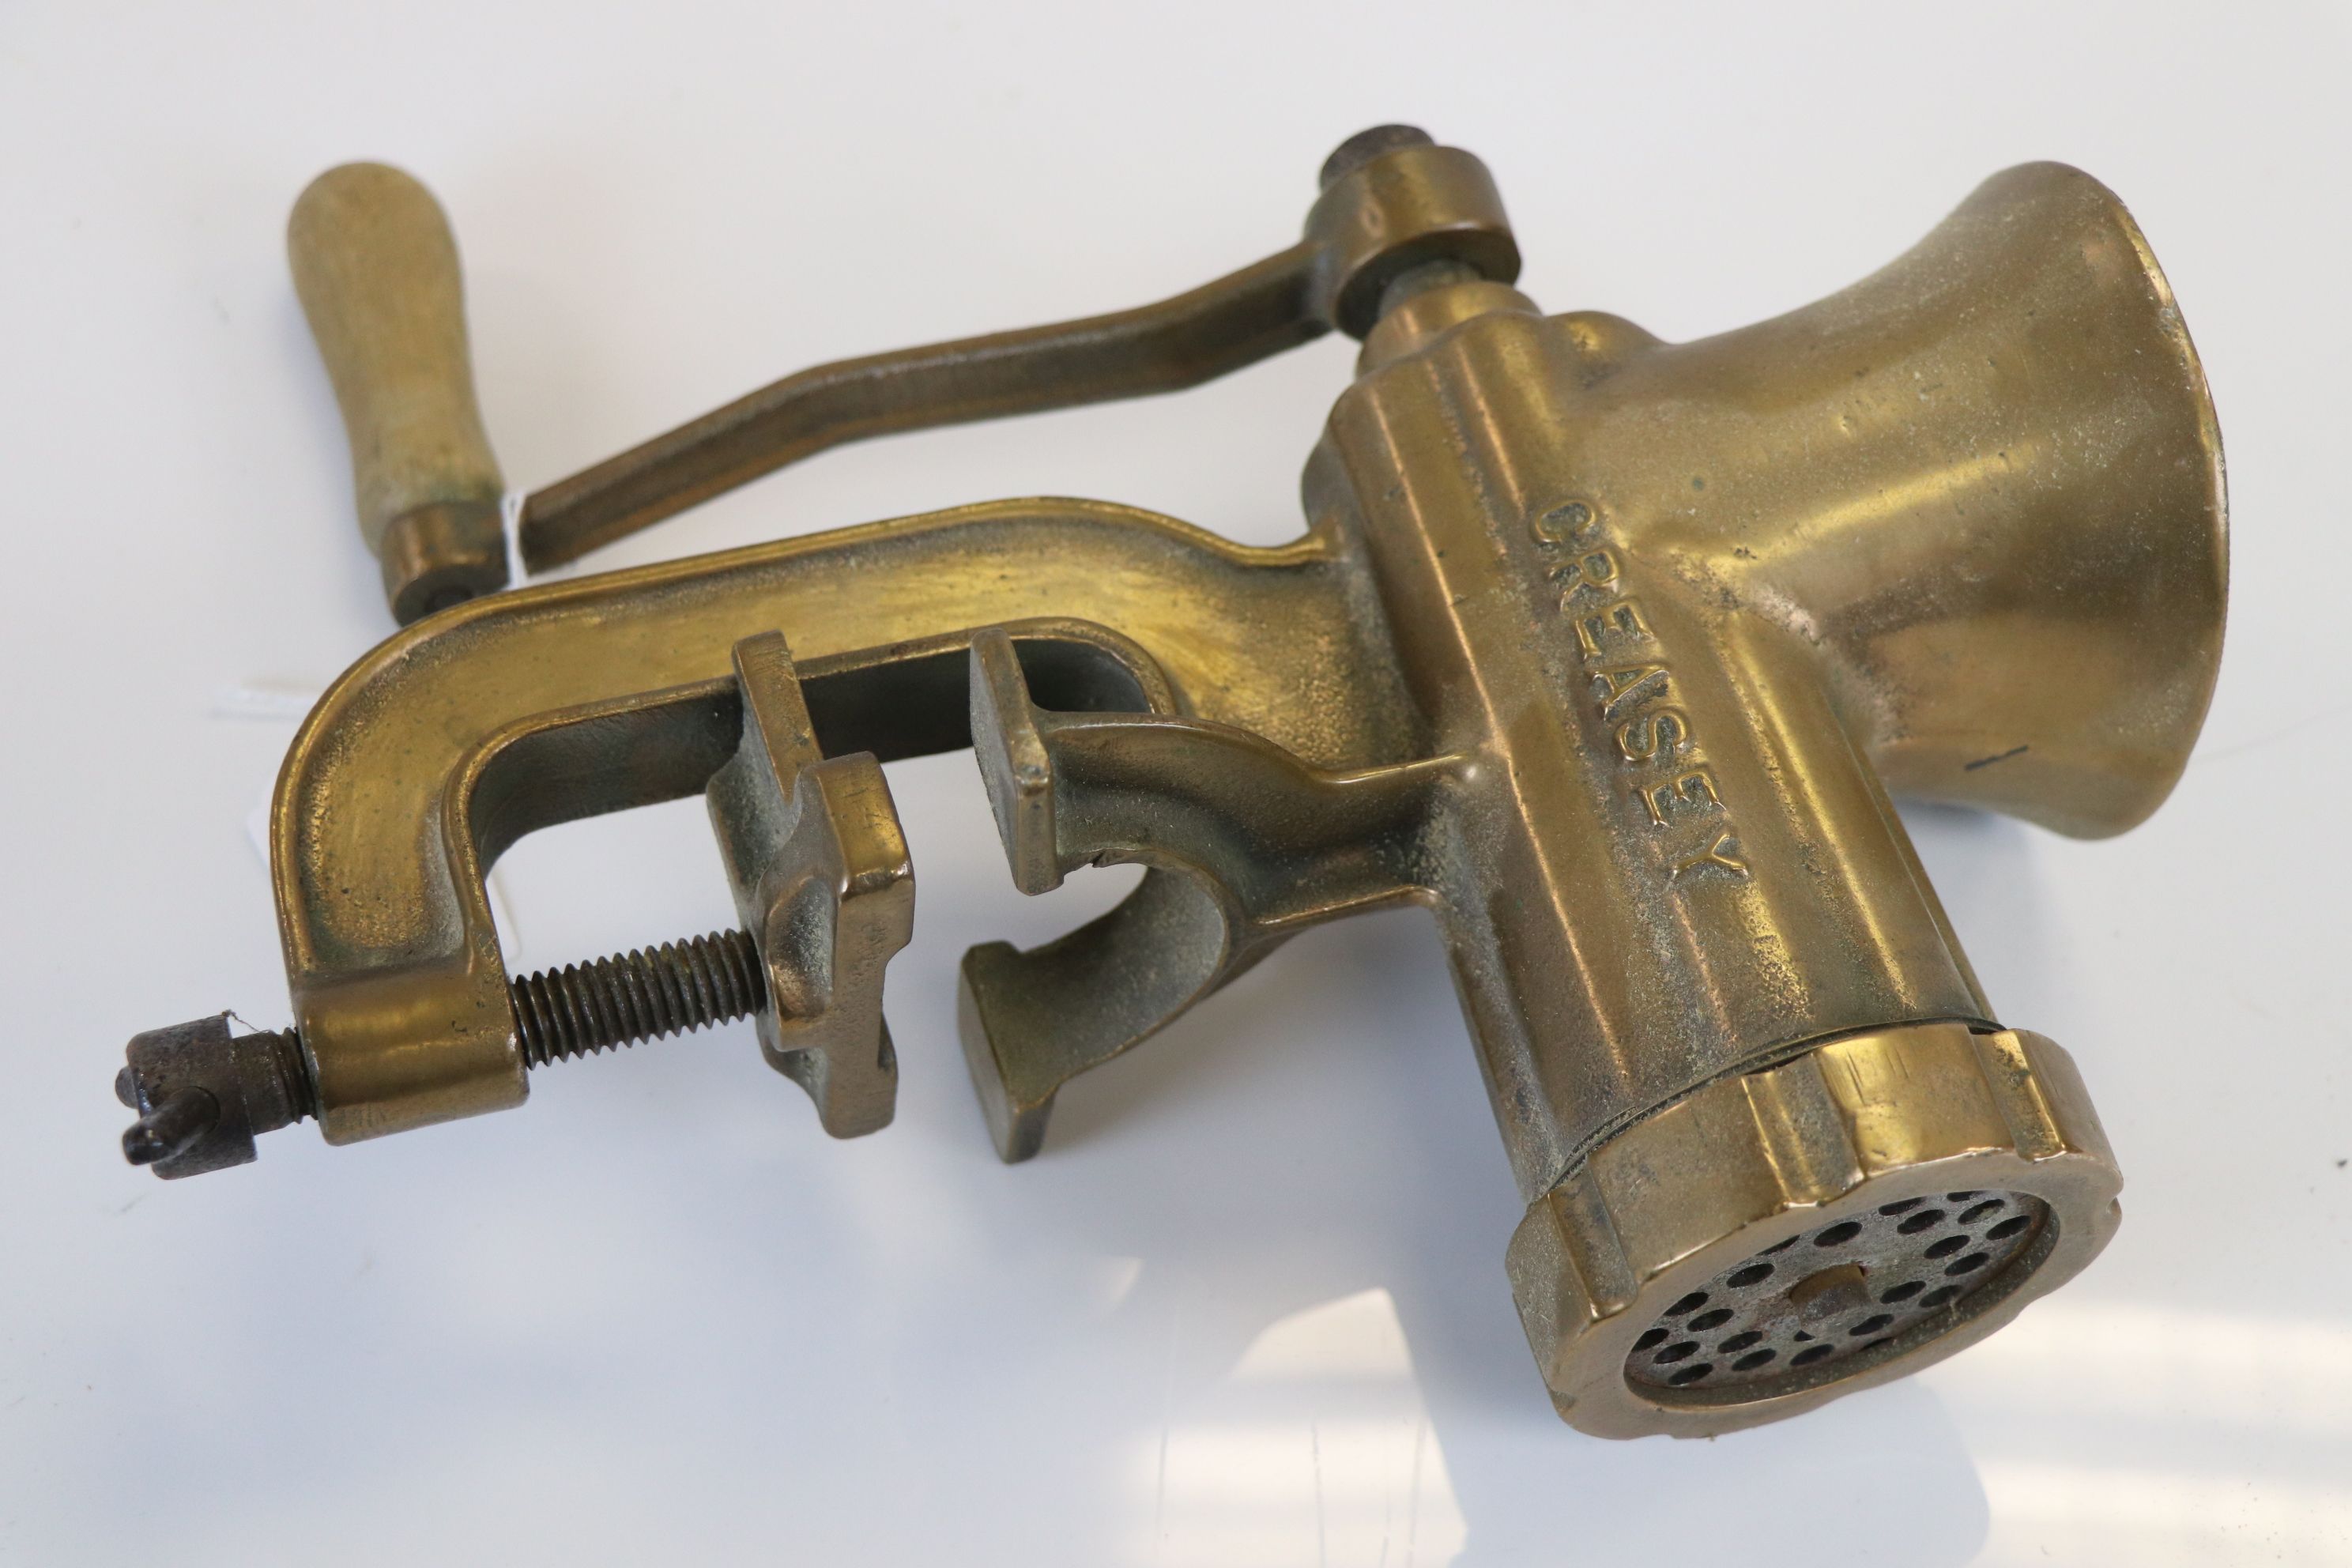 Creasey cast Brass or Bronze Mincer with wooden handle - Image 2 of 5